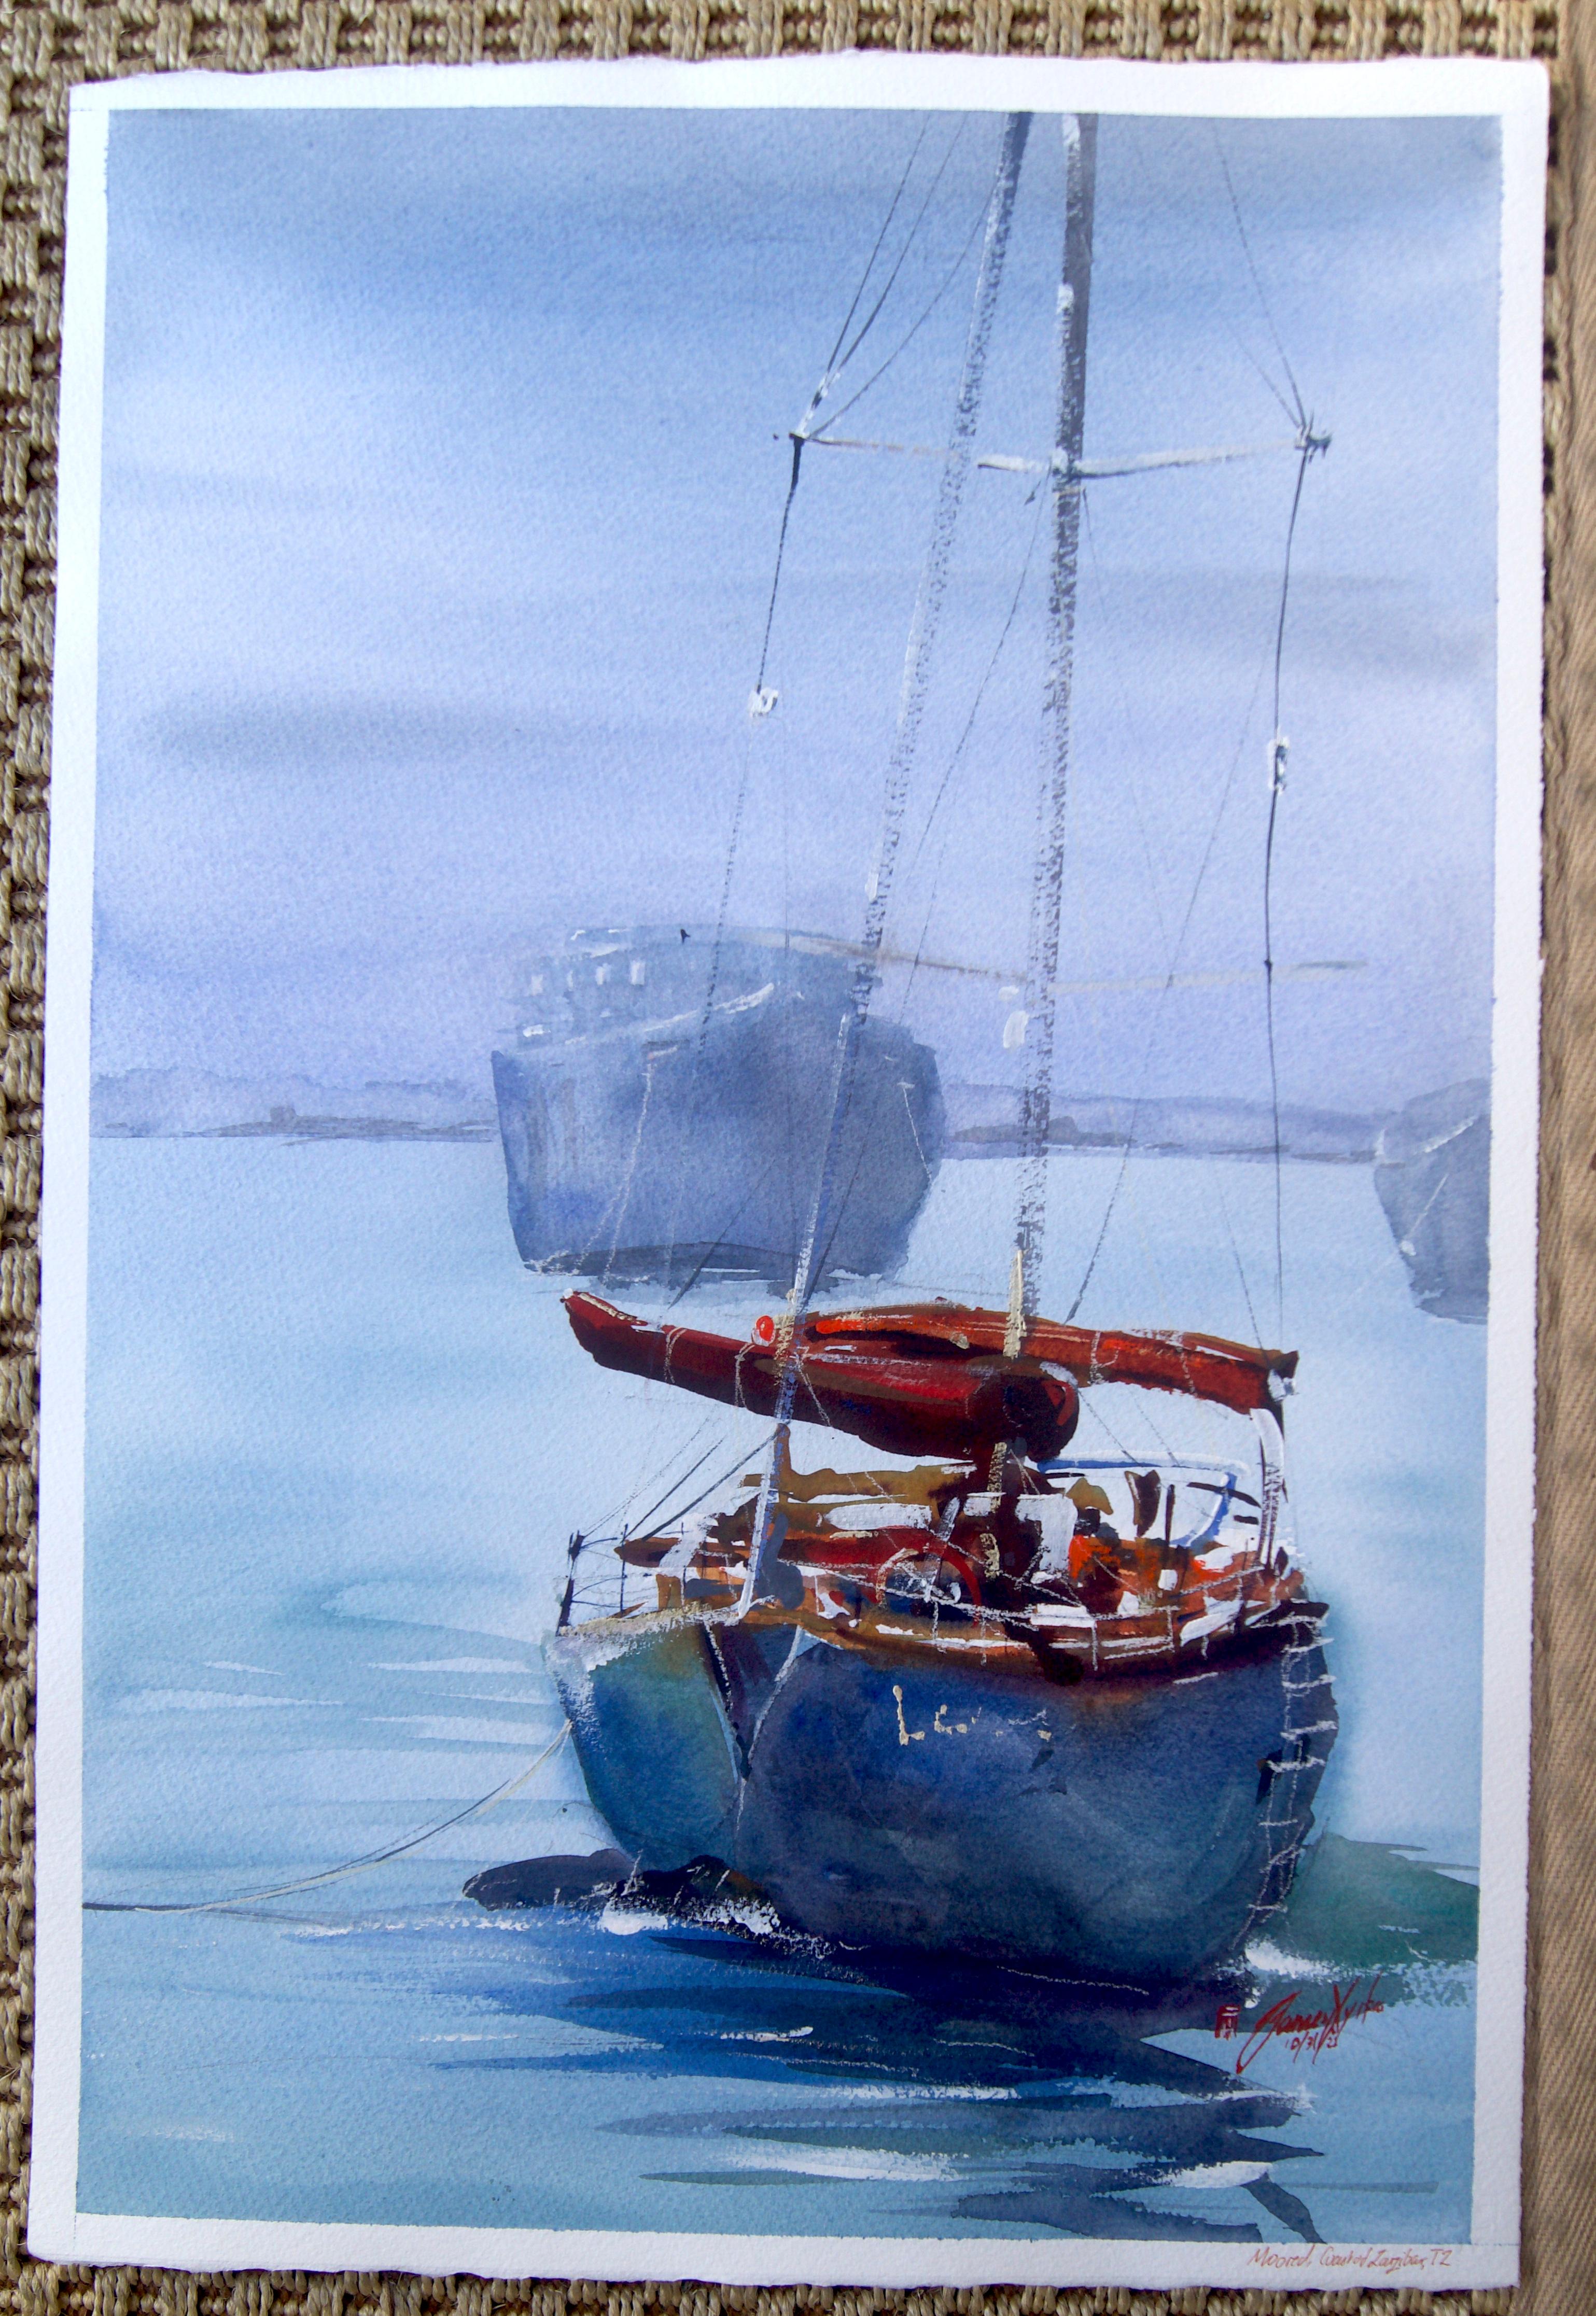 <p>Artist Comments<br>Artist James Nyika captures the quiet of still waters on a misty morning. A lone yacht floats peacefully while moored amongst a commercial shipping fleet. 